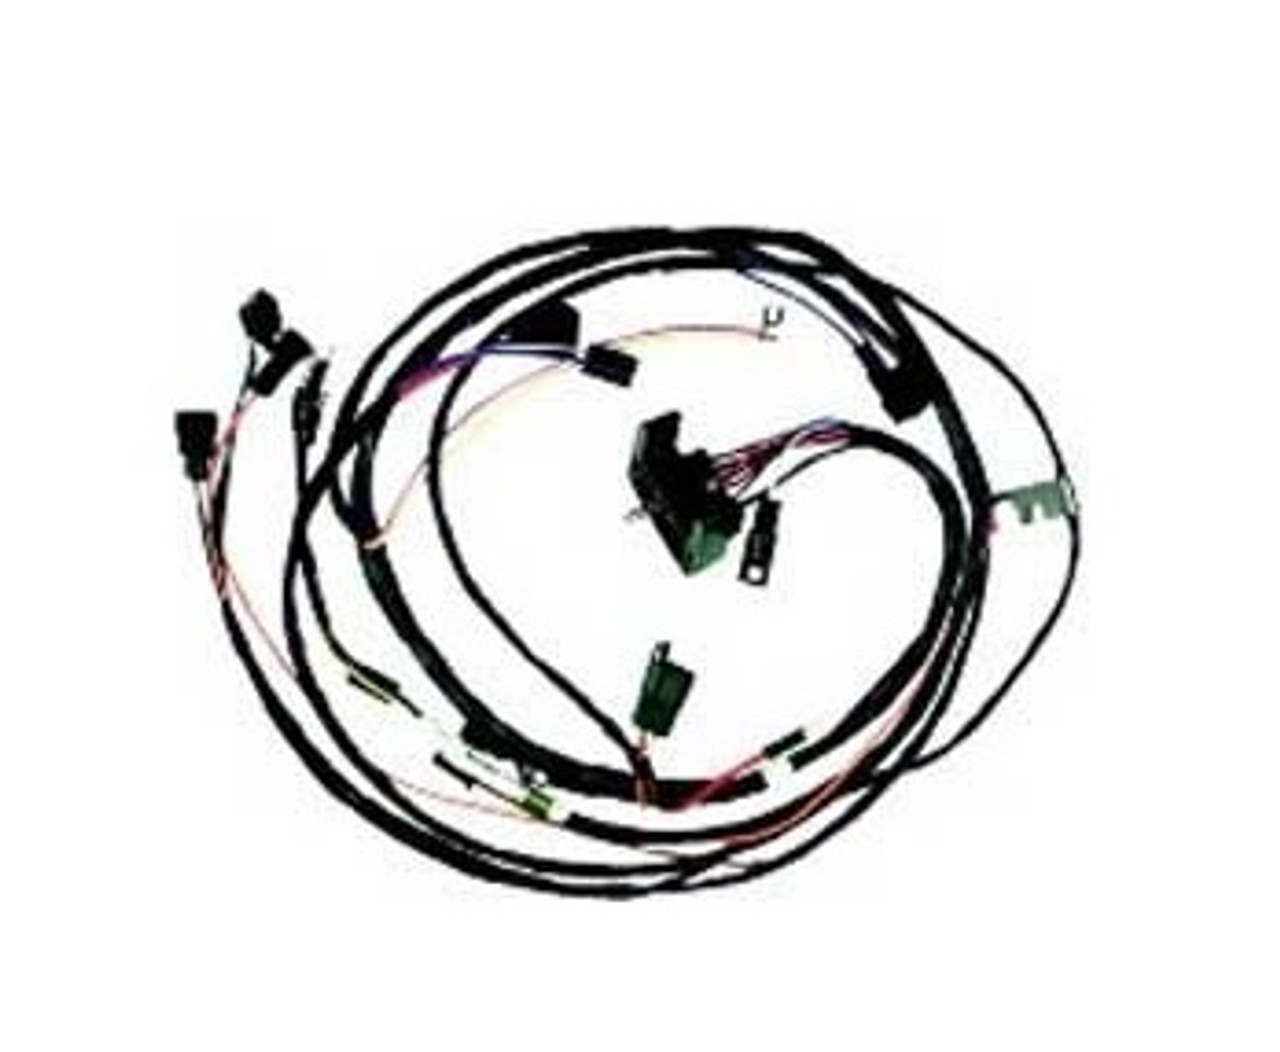 1968-69 Chevy, GMC Truck Engine Harness V8, Manual Trans (exc. 396 c.i.)